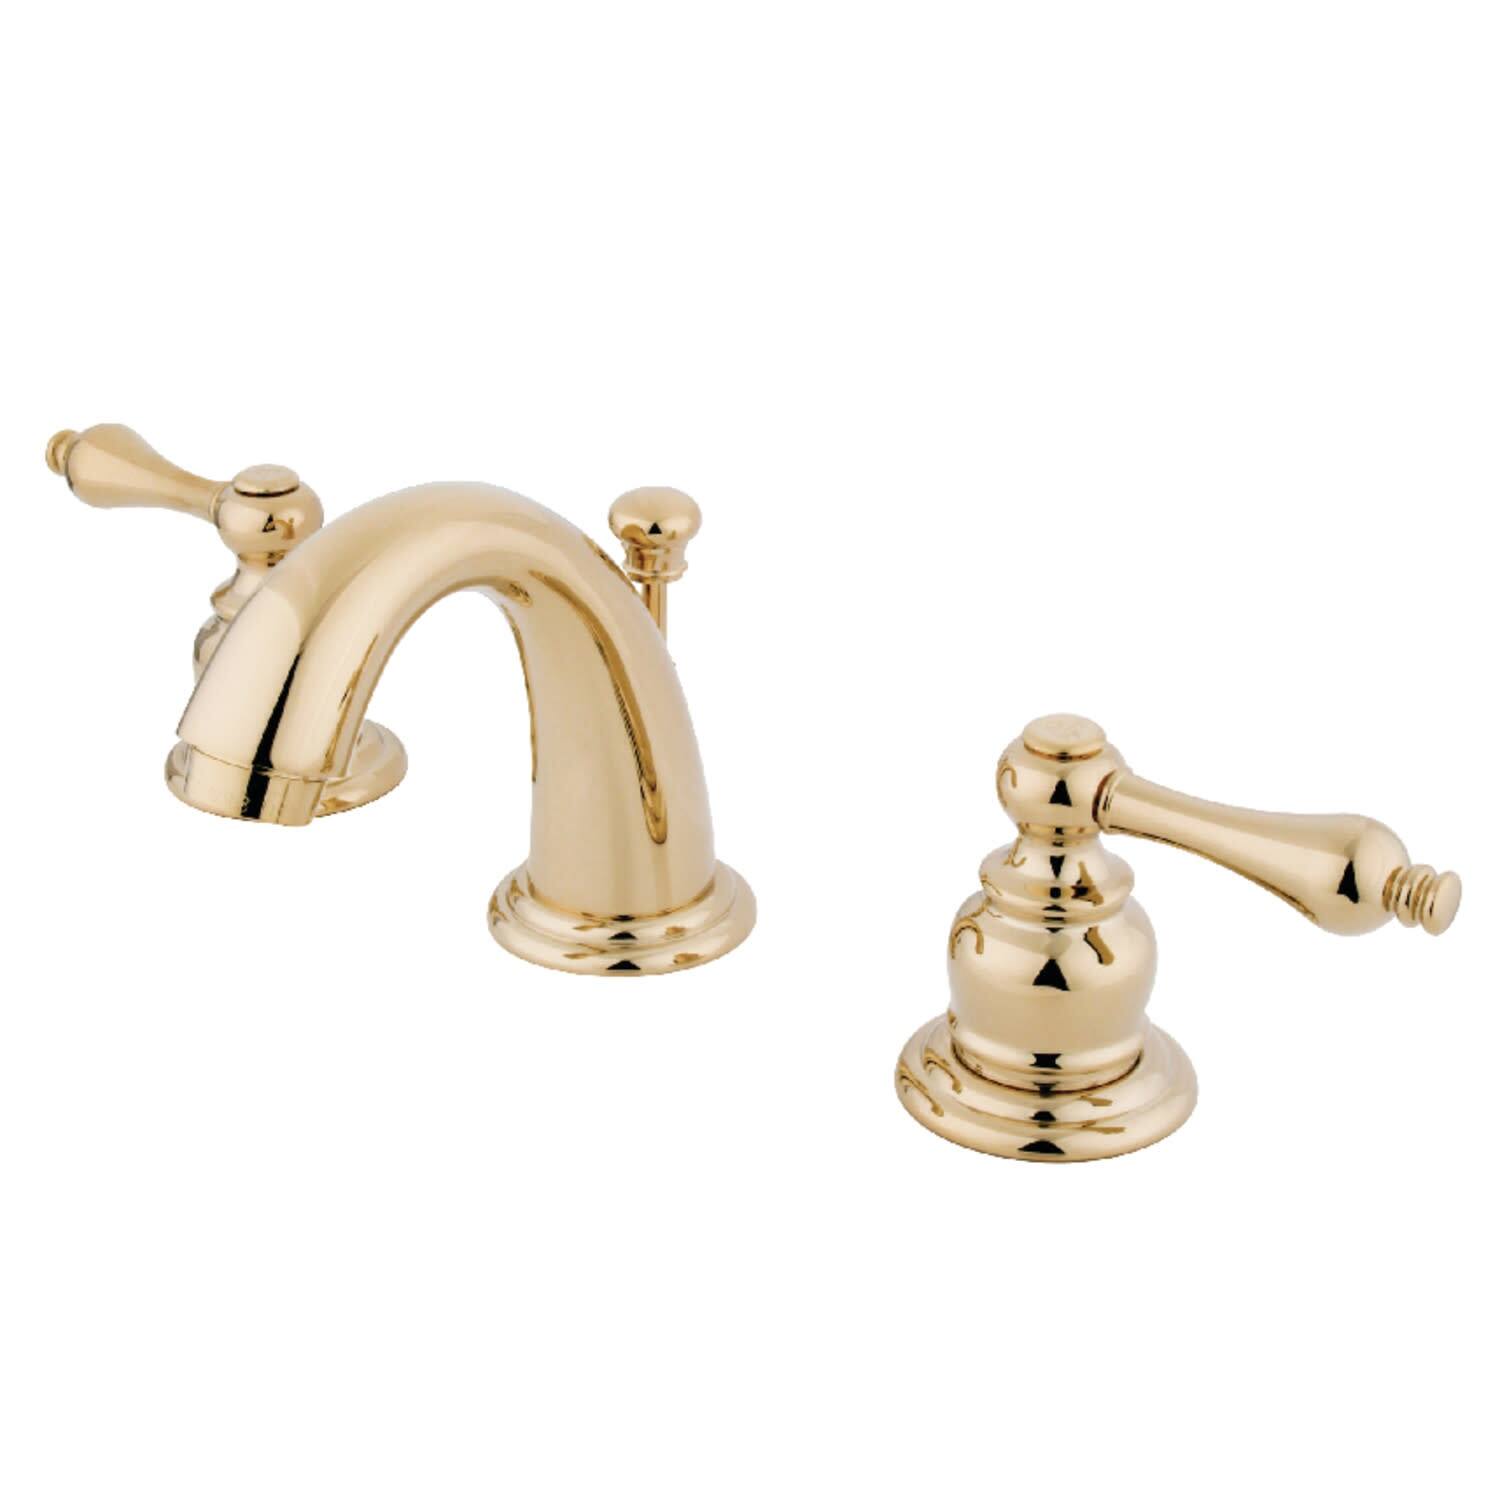 Kingston Brass English Country Widespread Bathroom Faucet with Pop-Up